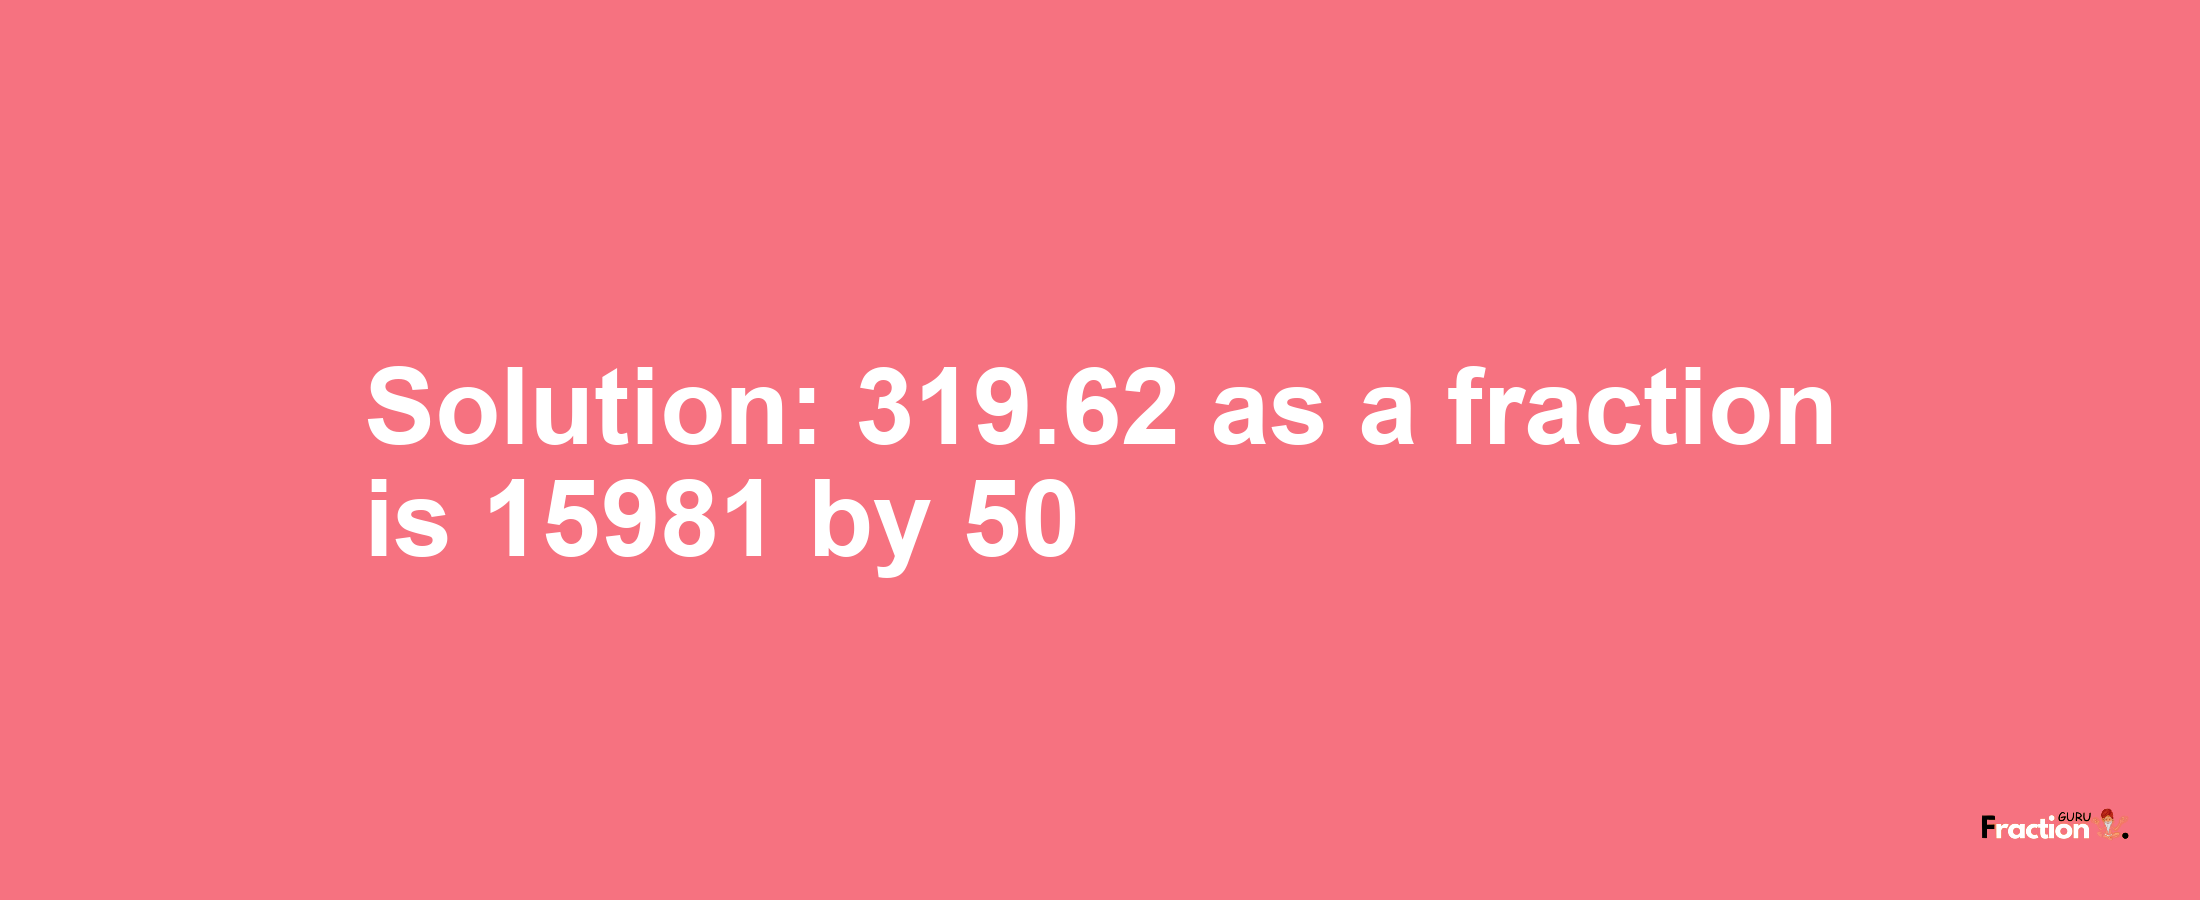 Solution:319.62 as a fraction is 15981/50